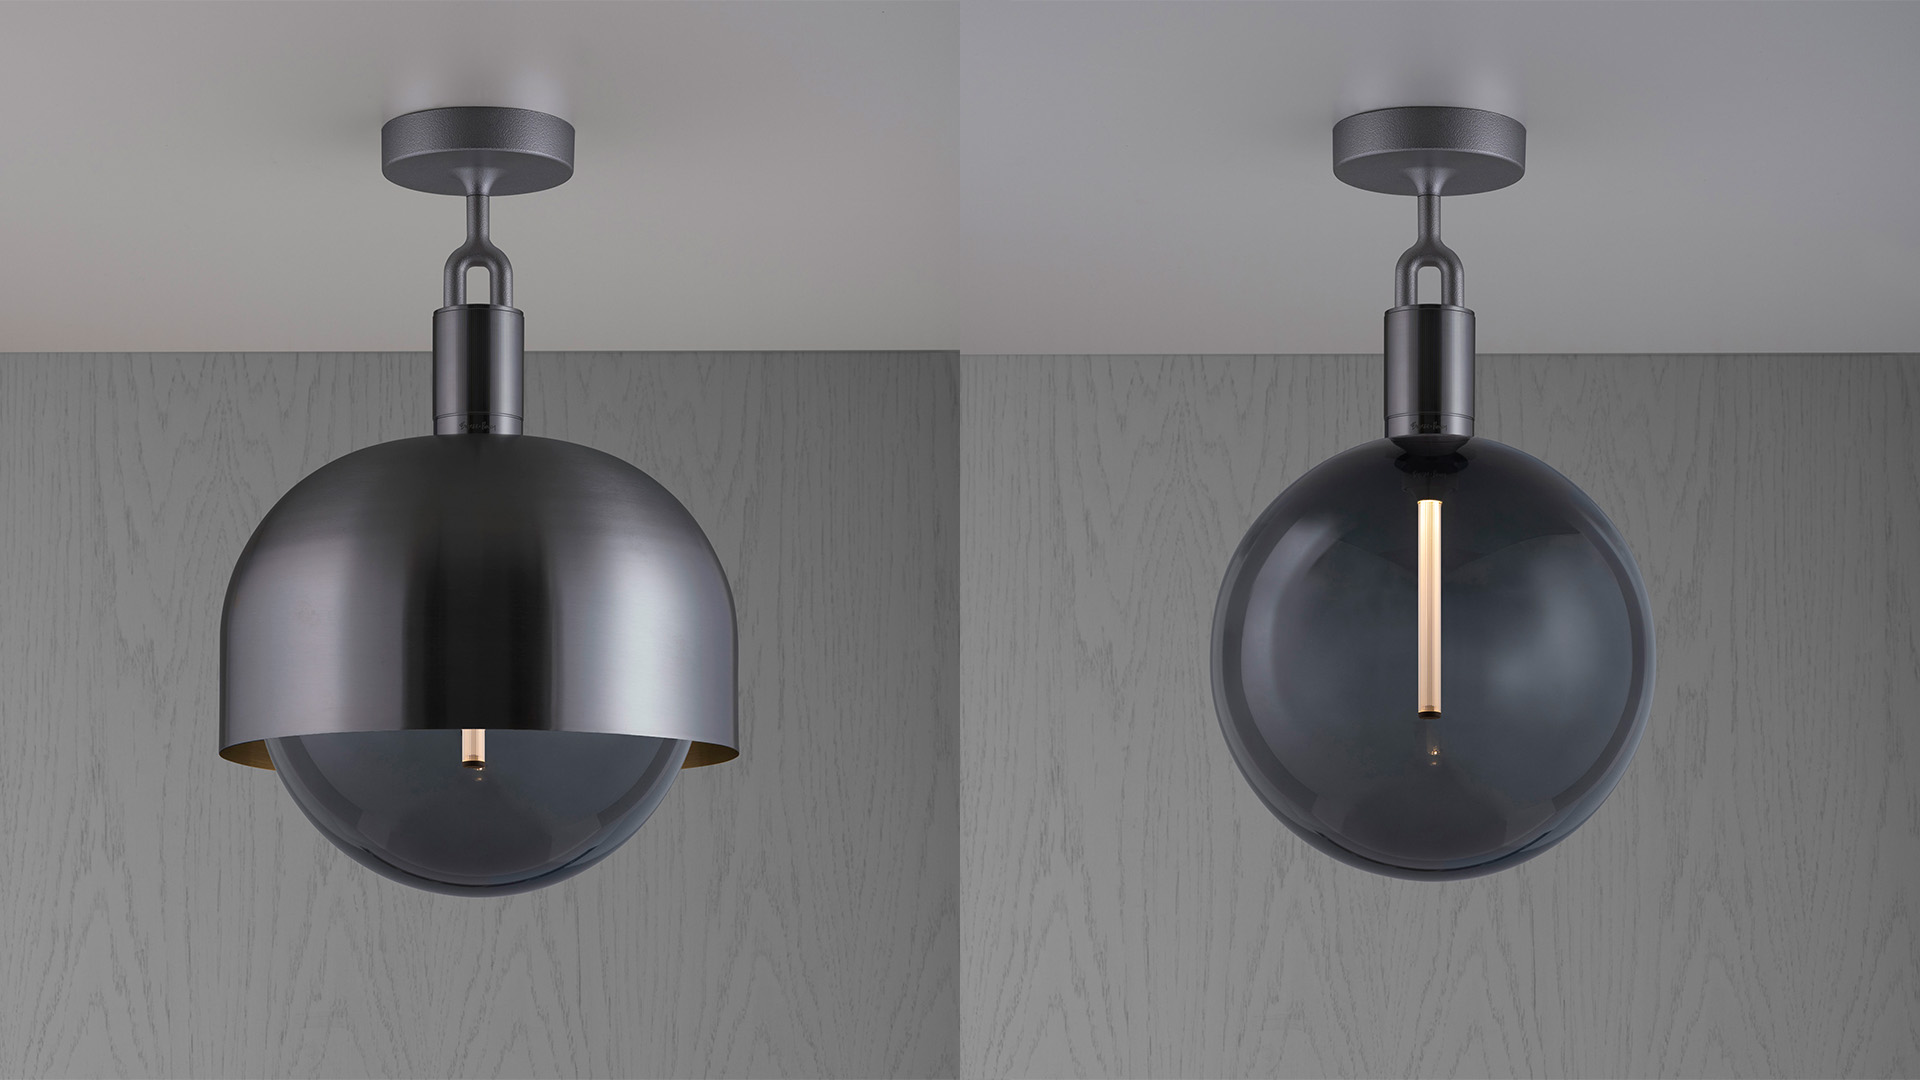 Forked Ceiling Light, Lifestyle